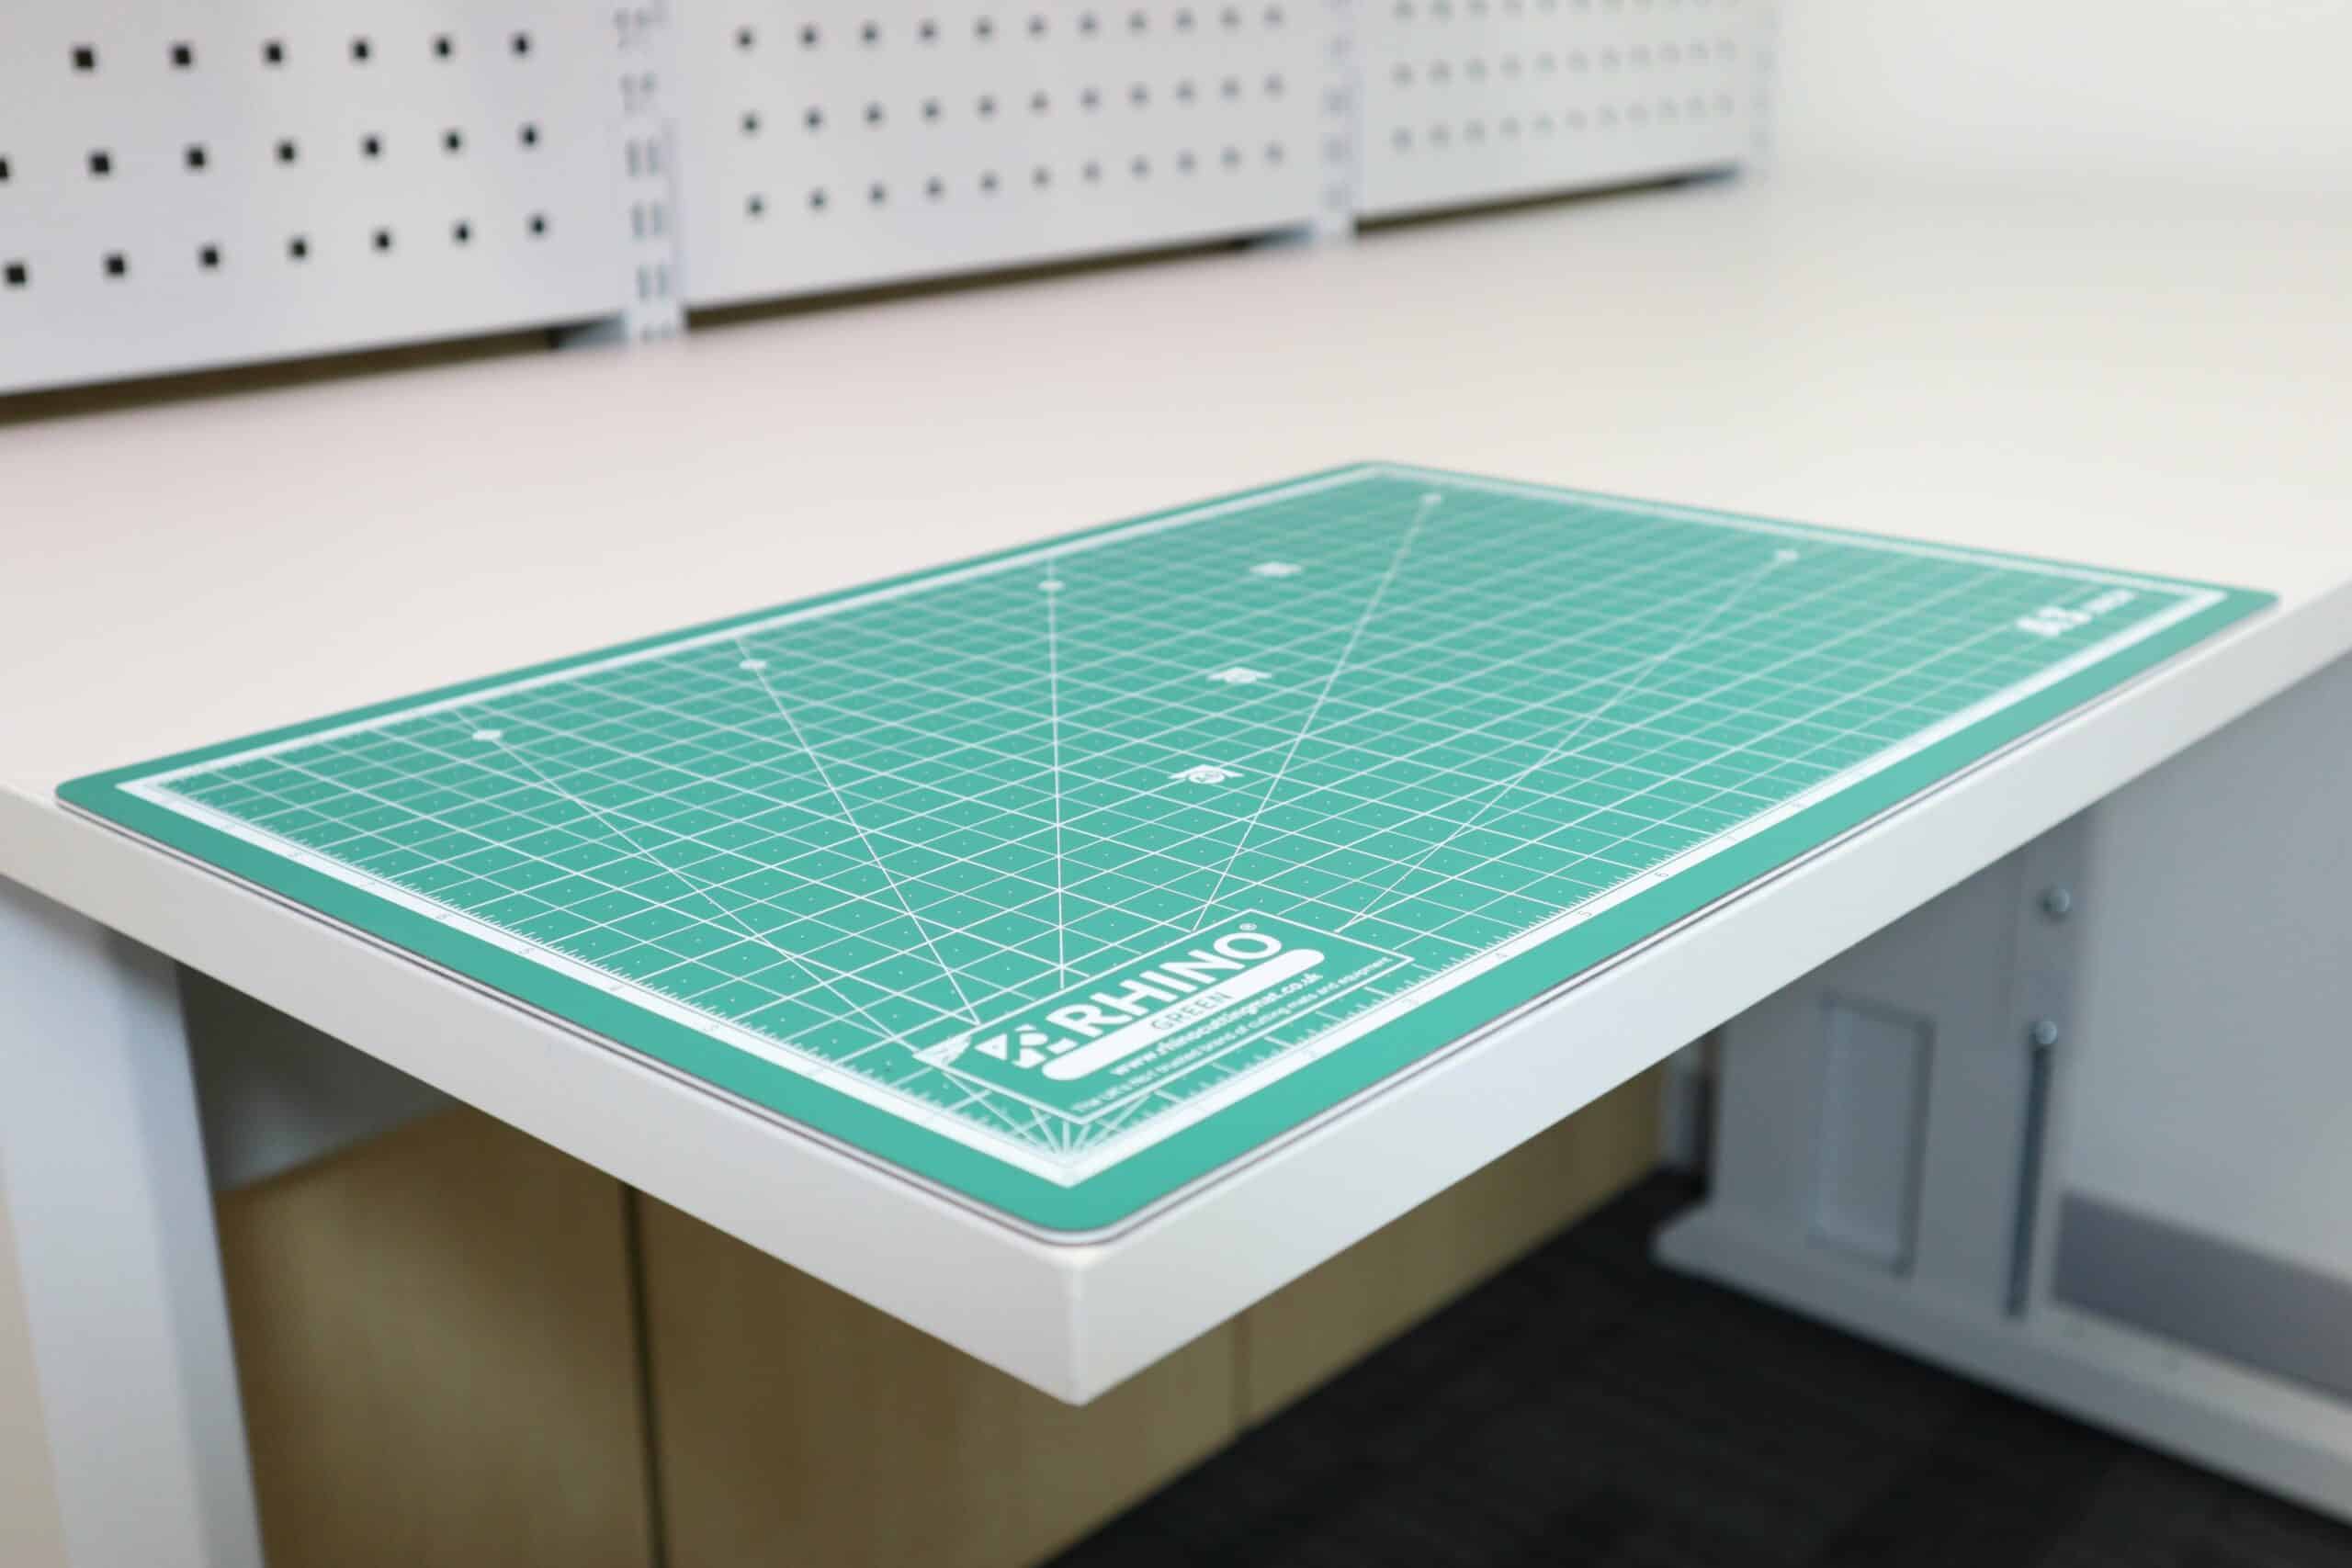 A0 Cutting Mat To Protect Your Workbench - Shop Online